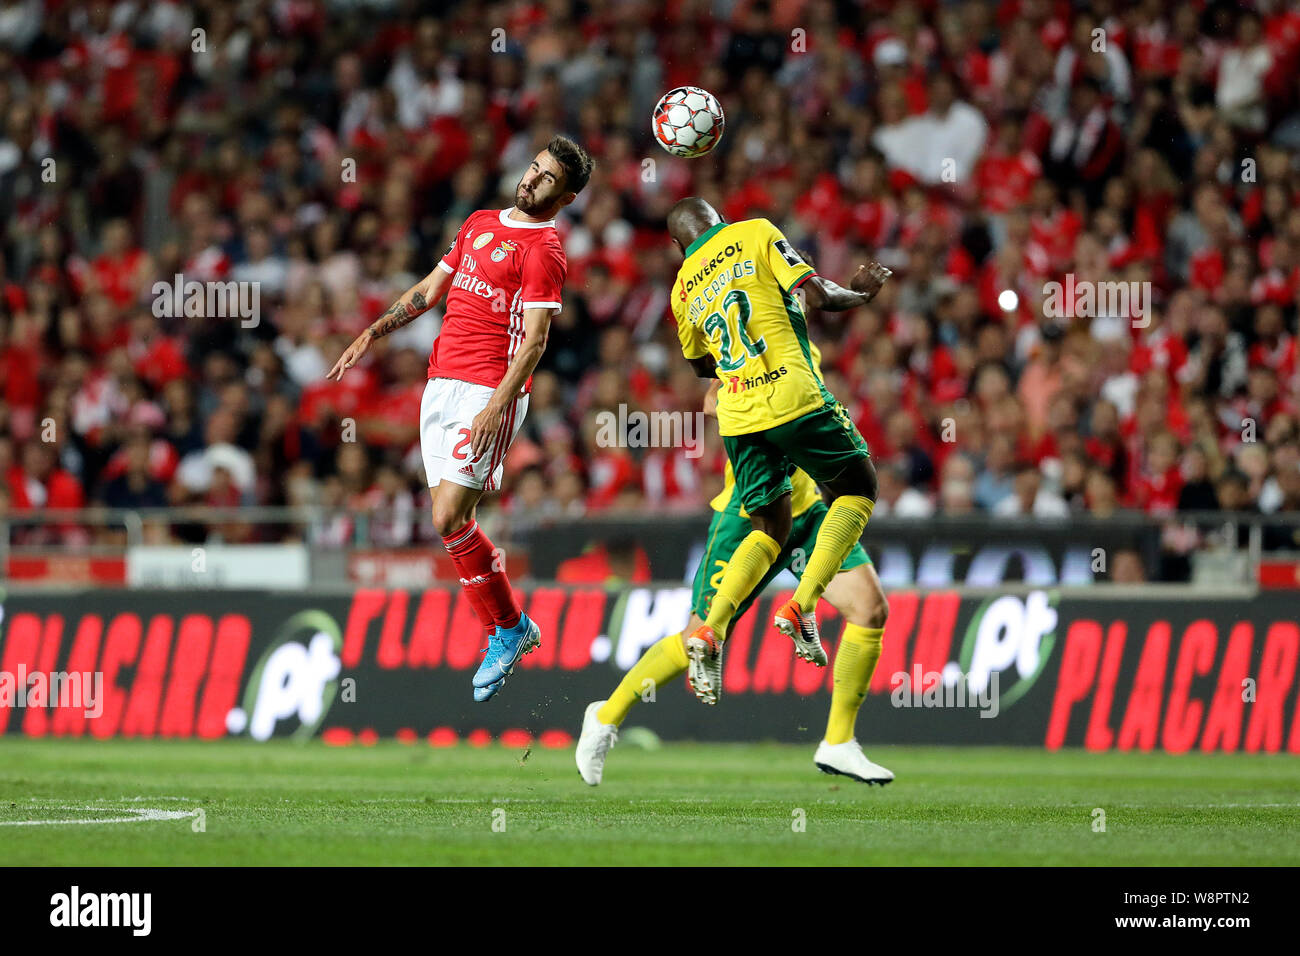 Lisbon, Portugal. 10th Aug, 2019. Rafa Silva of SL Benfica in action during the League NOS 2019/20 footballl match between SL Benfica vs FC Paços de Ferreira. (Final score: SL Benfica 5 - 0 FC Paços de Ferreira) Credit: SOPA Images Limited/Alamy Live News Stock Photo